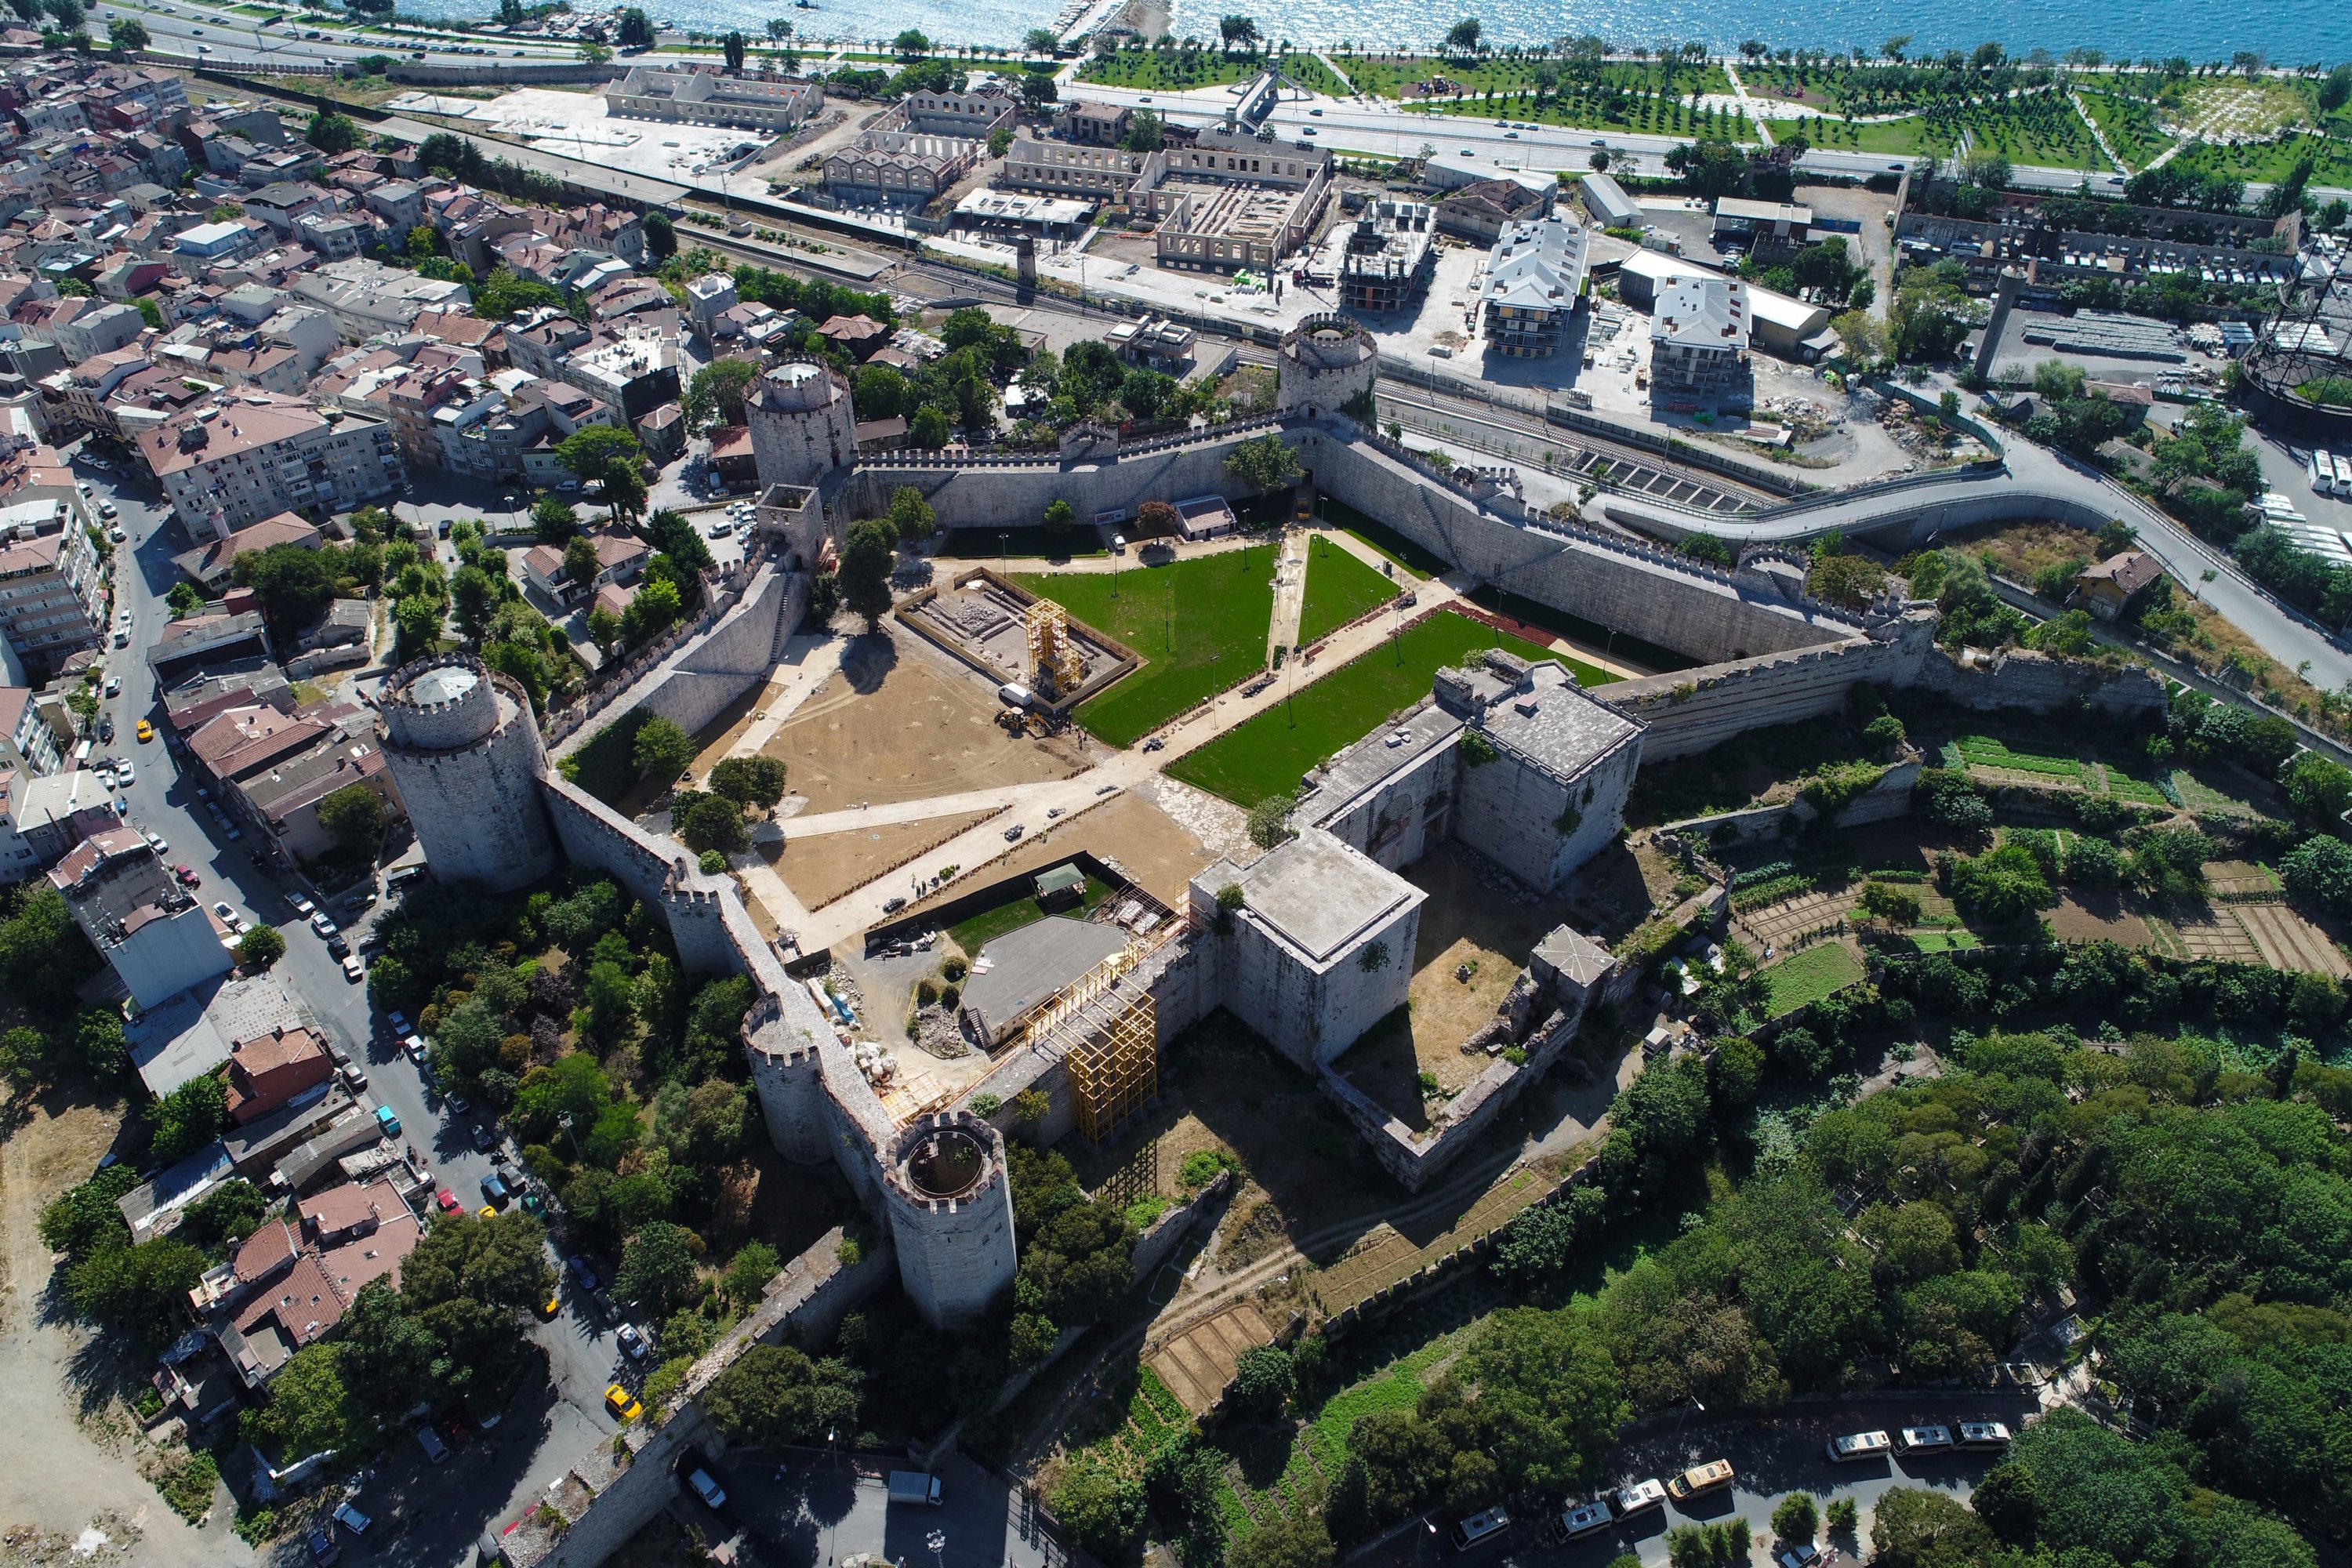 An aerial view of Yedikule Fortress, in Fatih, Istanbul.